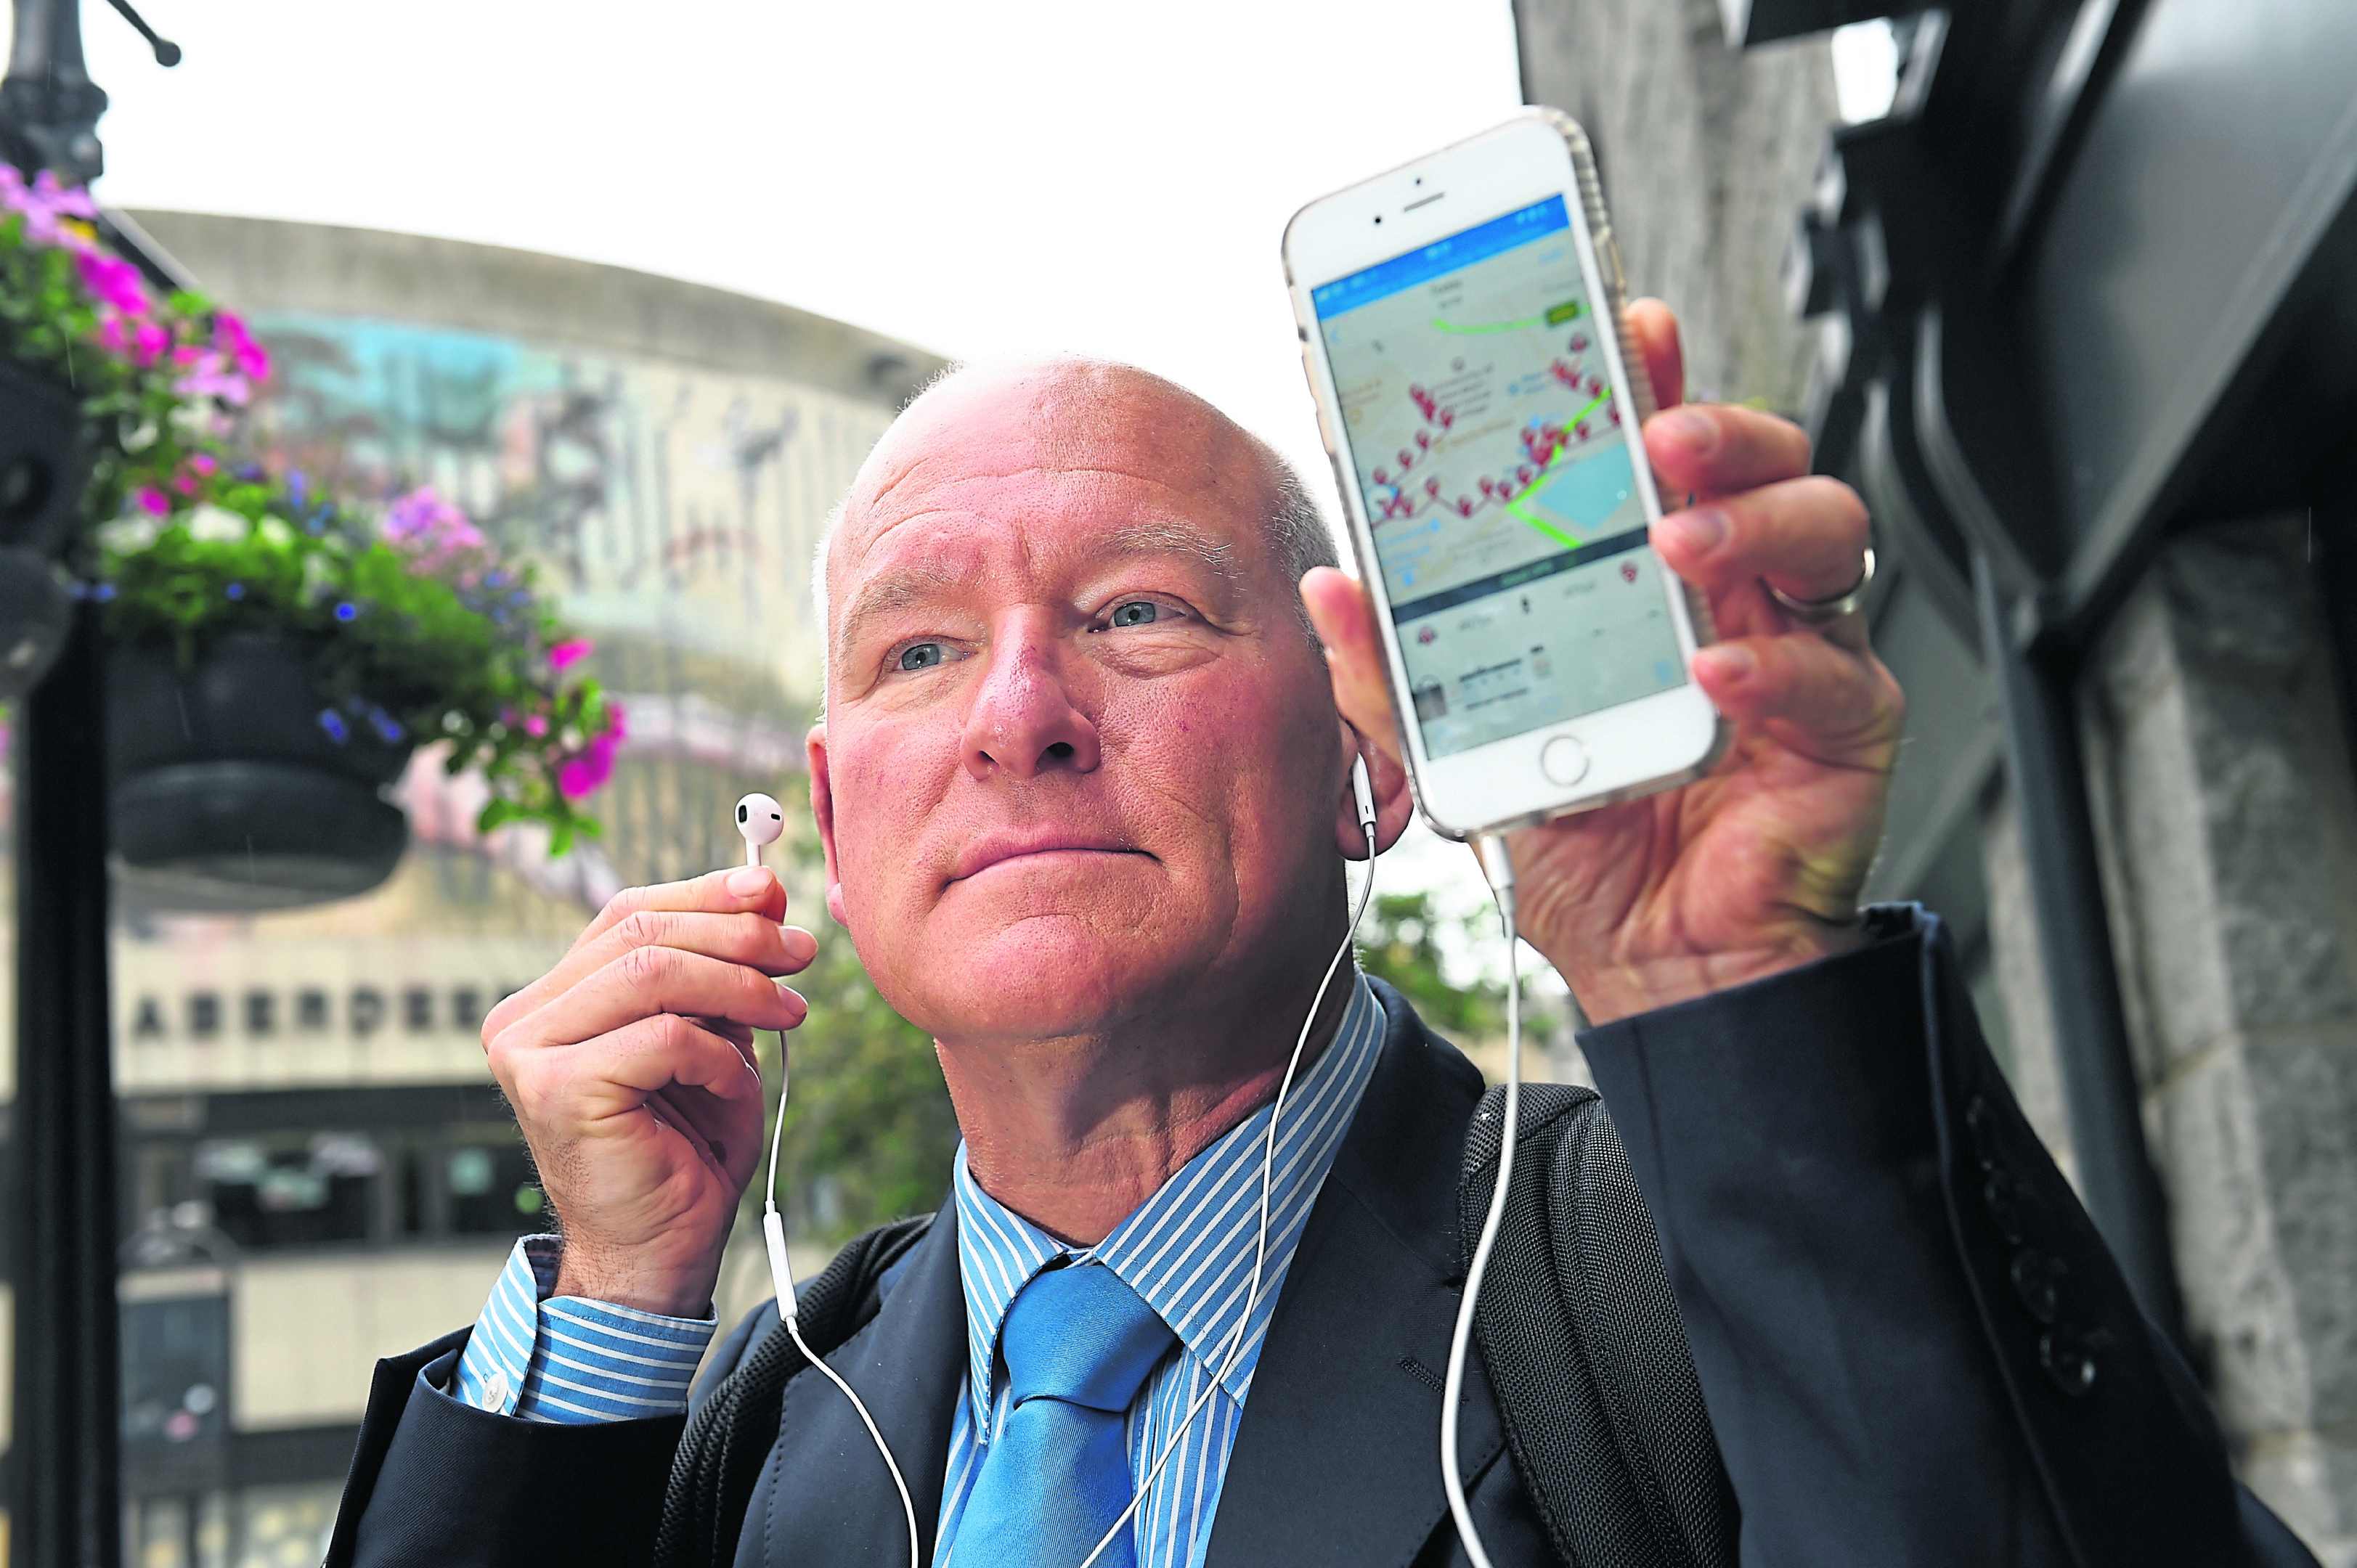 Bryan Atchison has launched a self-guided tour of the city, with phones using GPS to match a walkers location and play audio automatically.

Picture by Kenny Elrick.